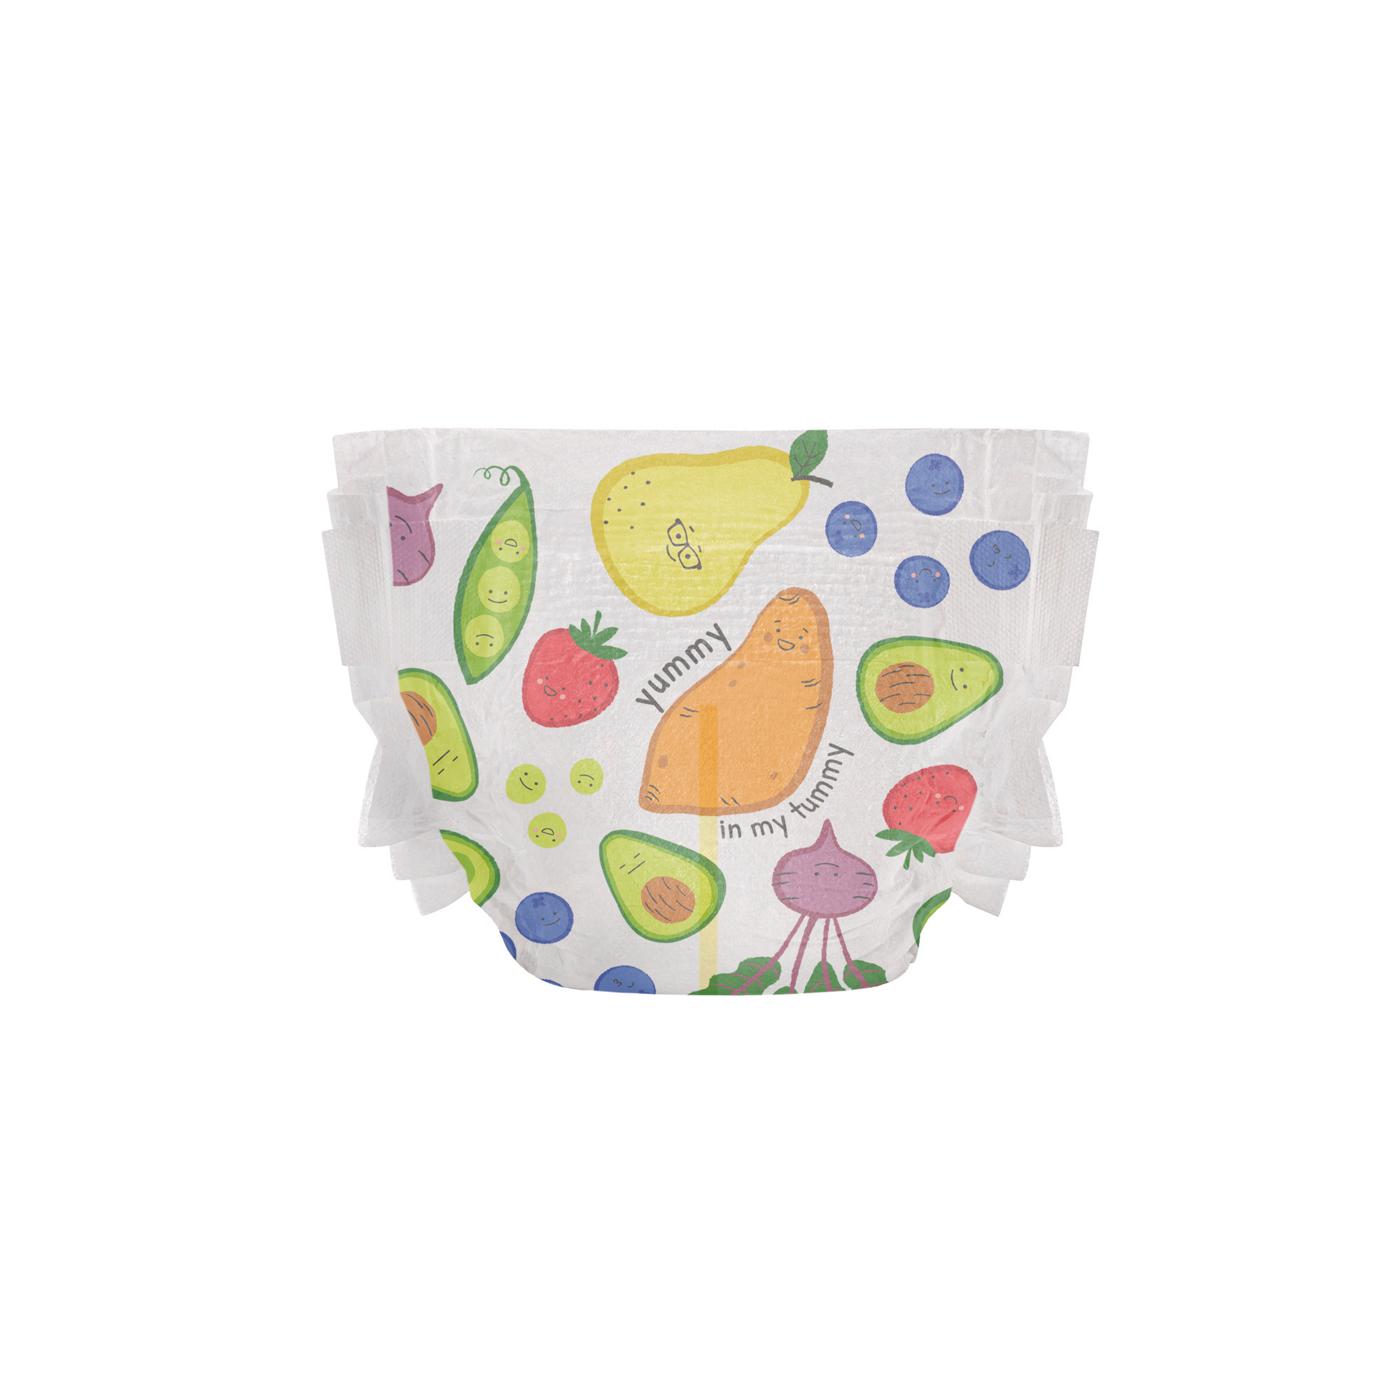 The Honest Company Clean Conscious Diapers - Size 6, Veggie Print; image 4 of 7